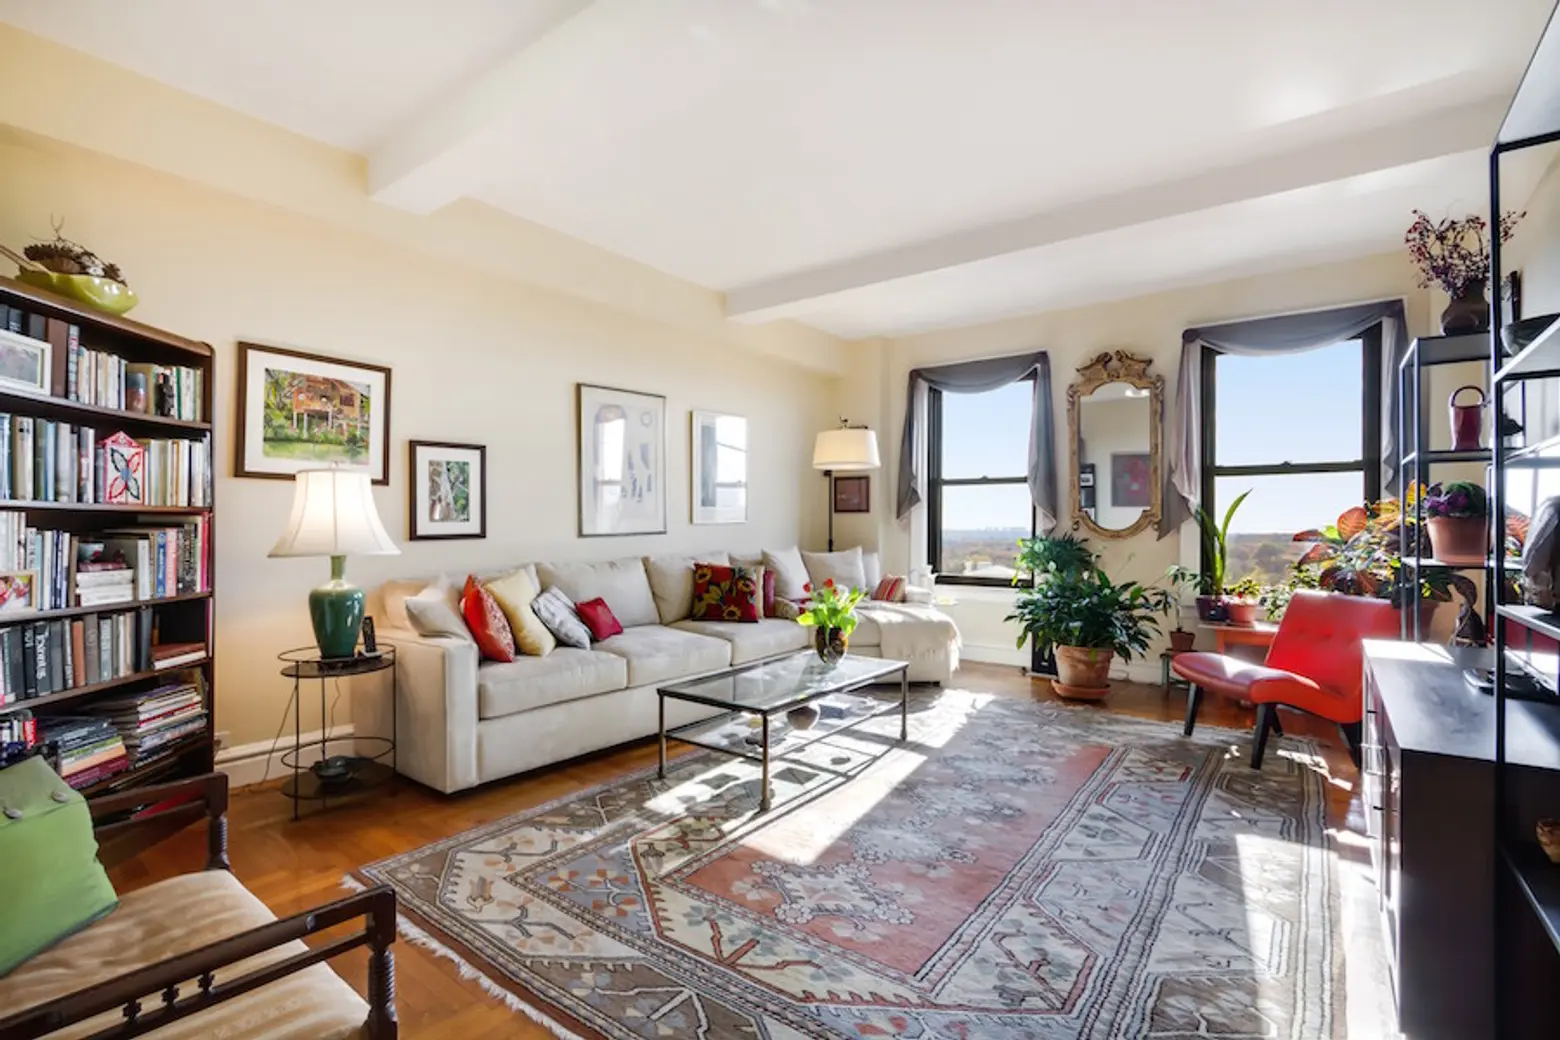 Bought for Just $7,600 in the ’70s, Prospect Heights Co-op Returns 43 Years Later for $2.15M